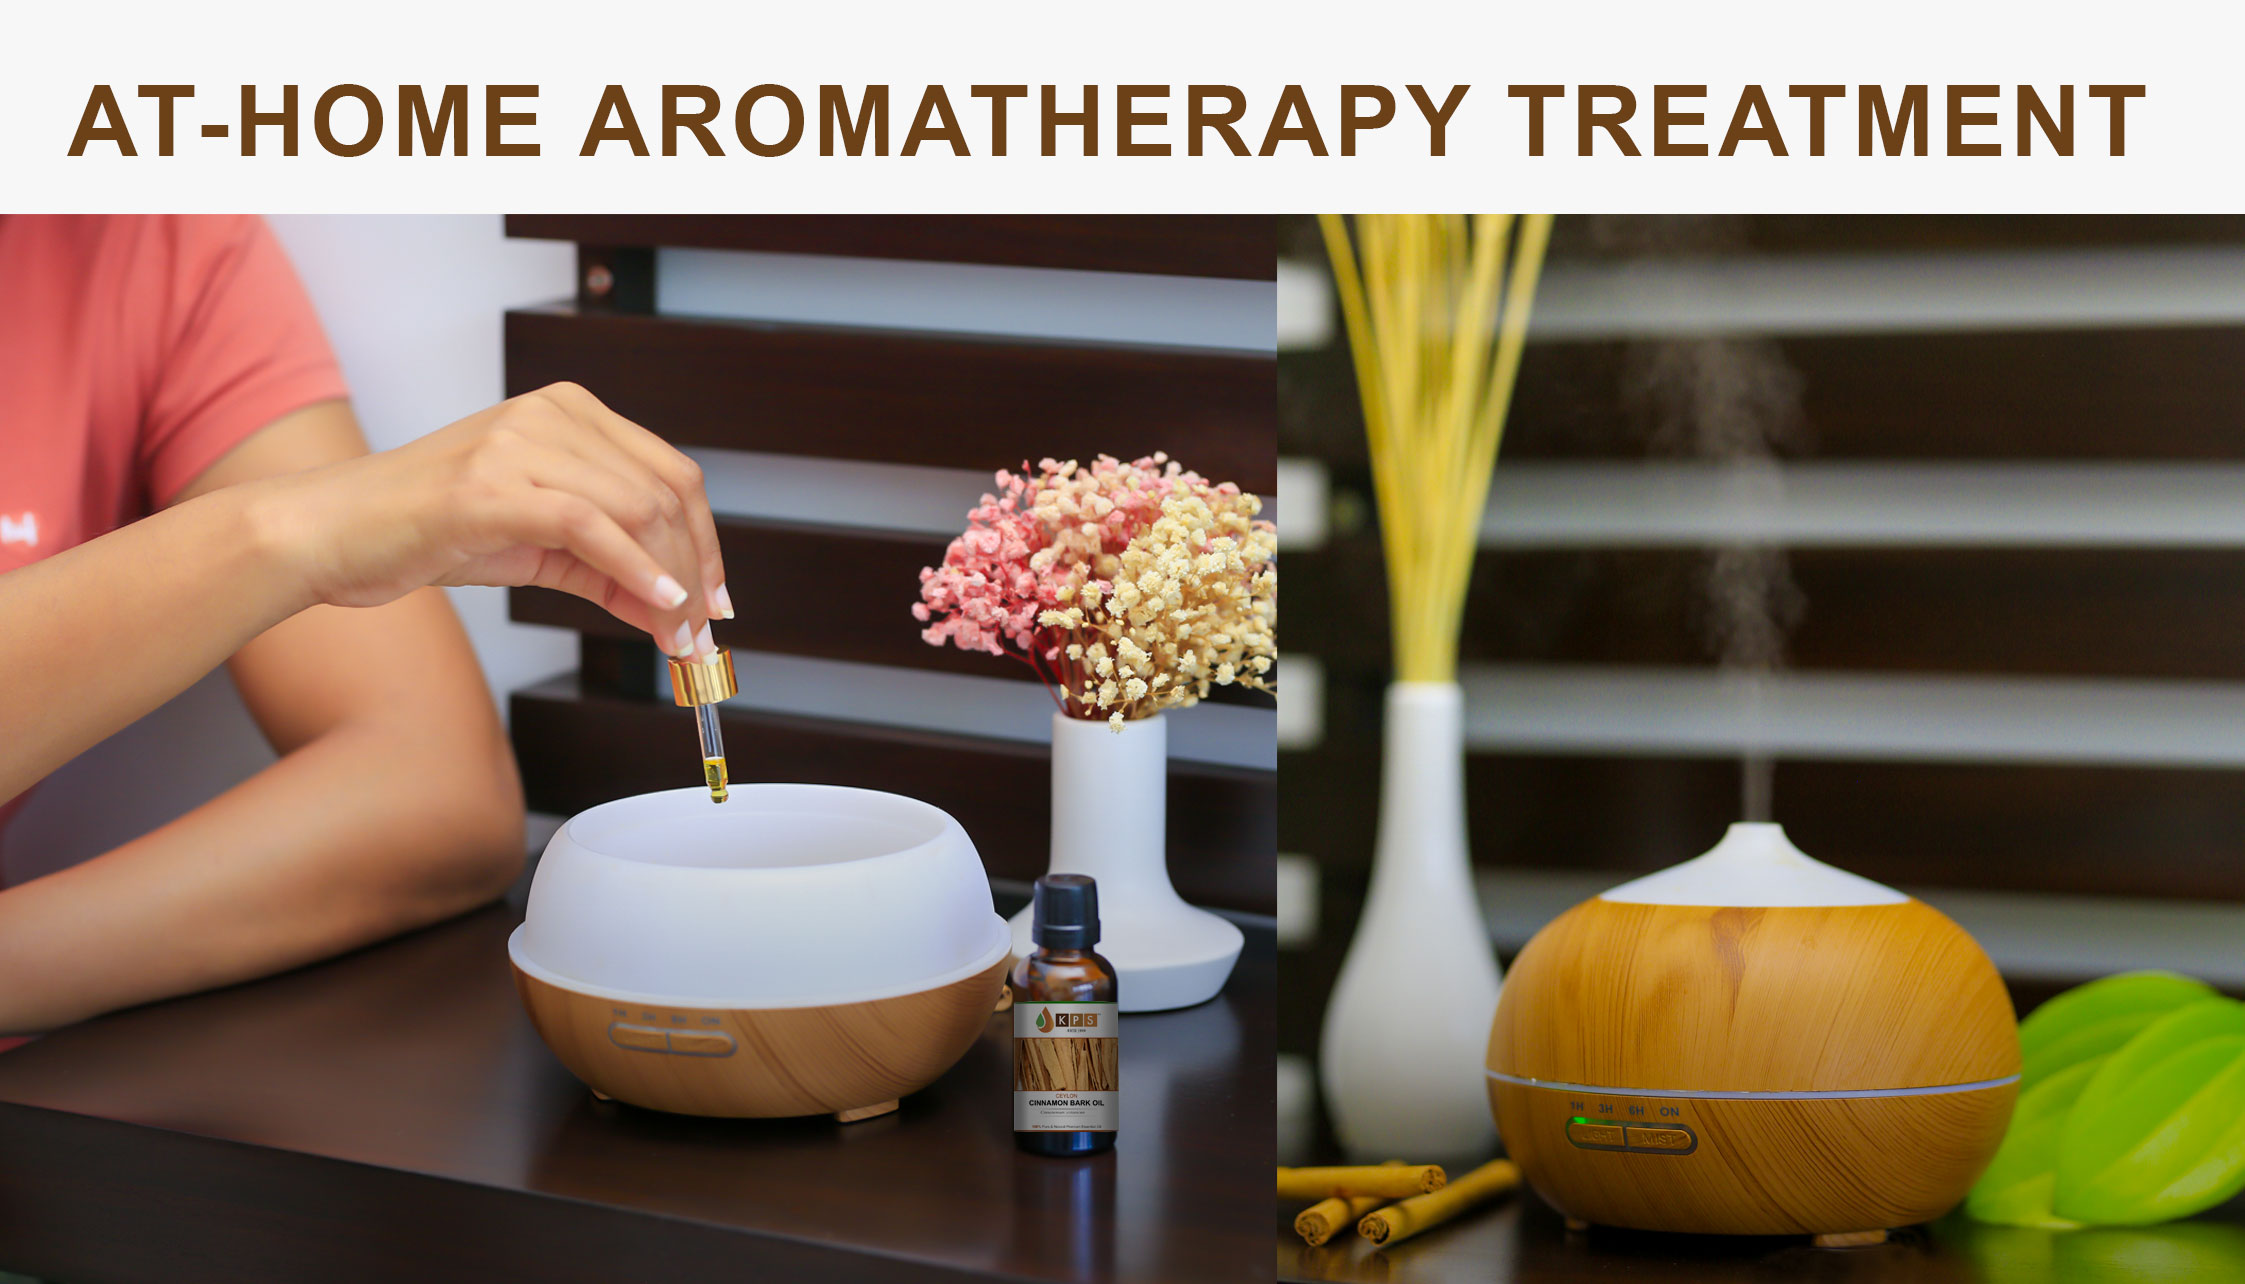 AT-HOME AROMATHERAPY TREATMENT